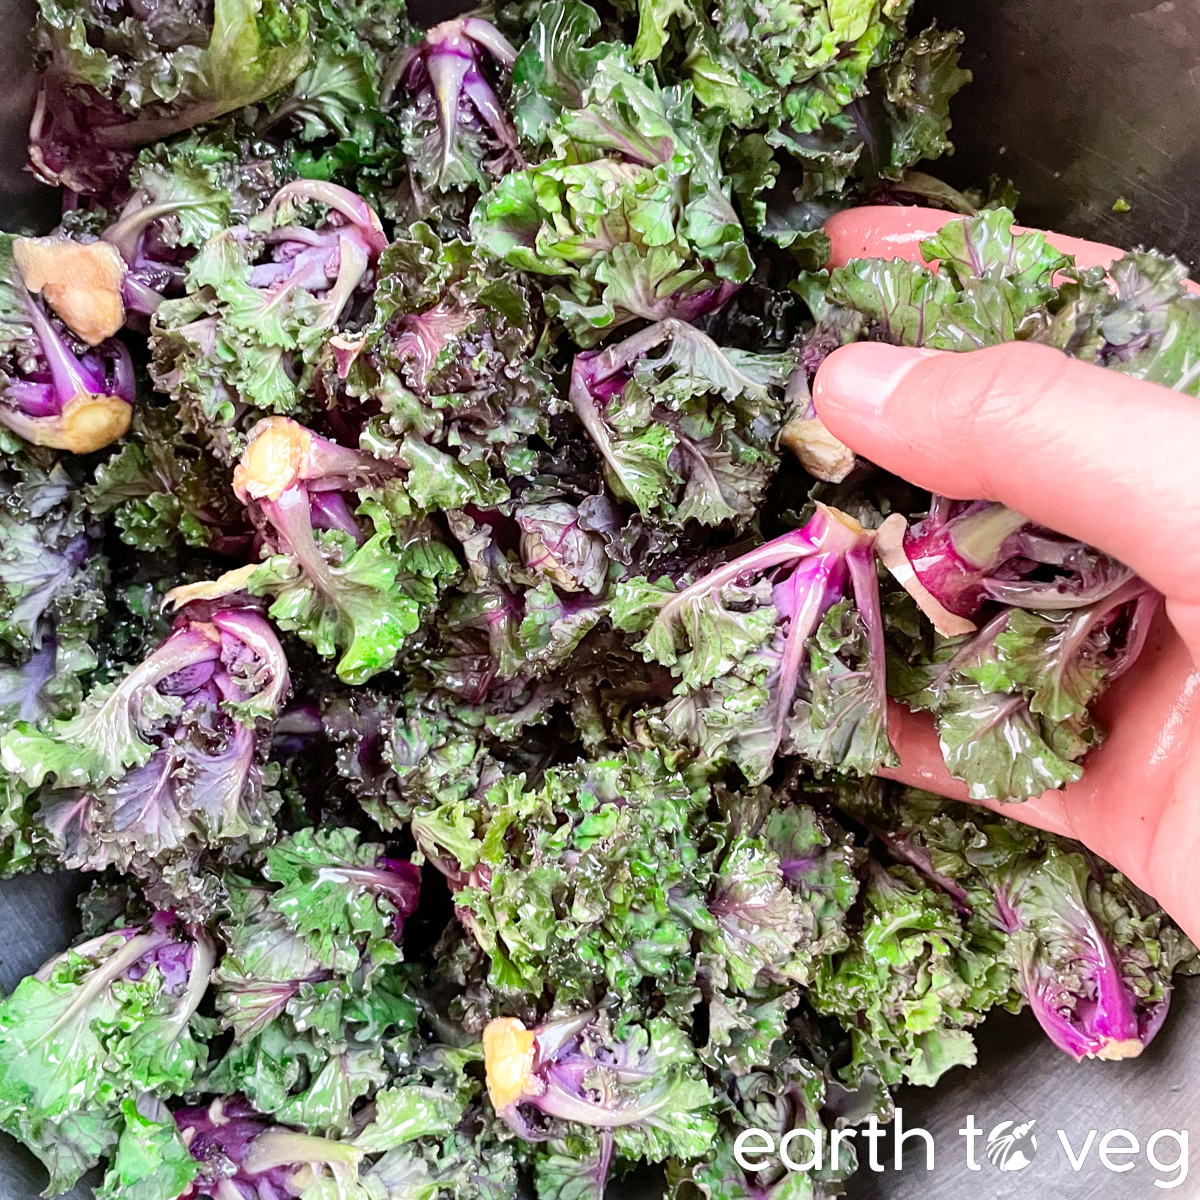 massaging kalettes with oil and seasoning